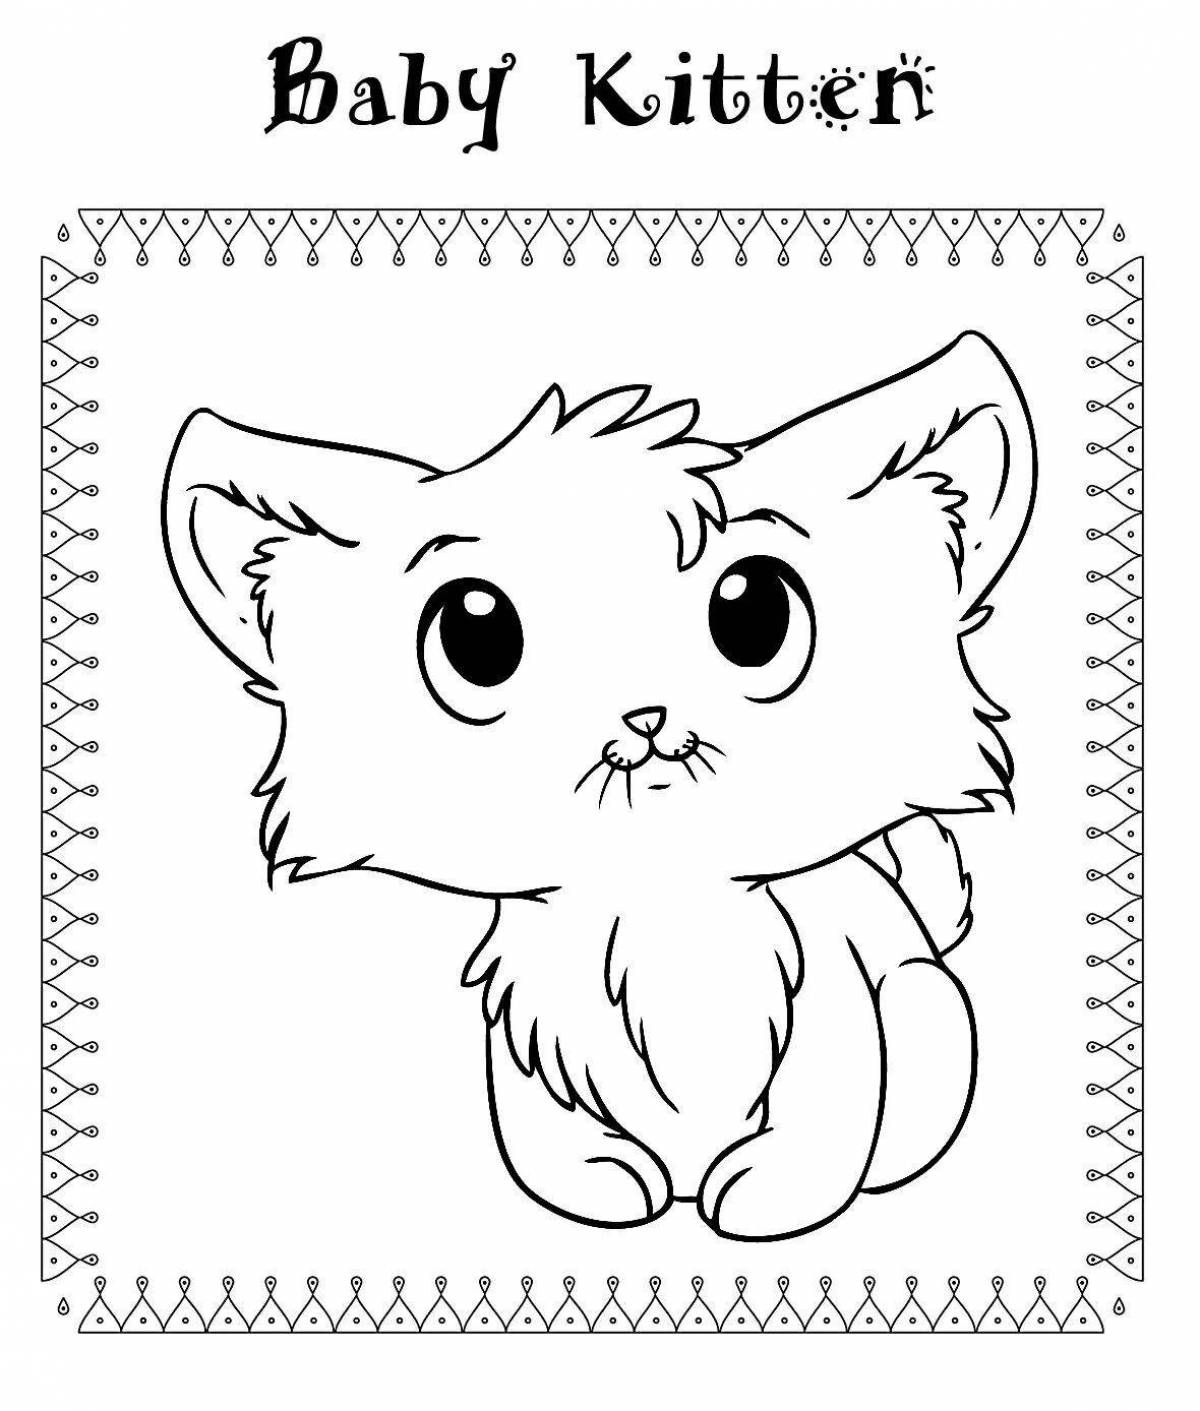 Cute and adorable kitten coloring book